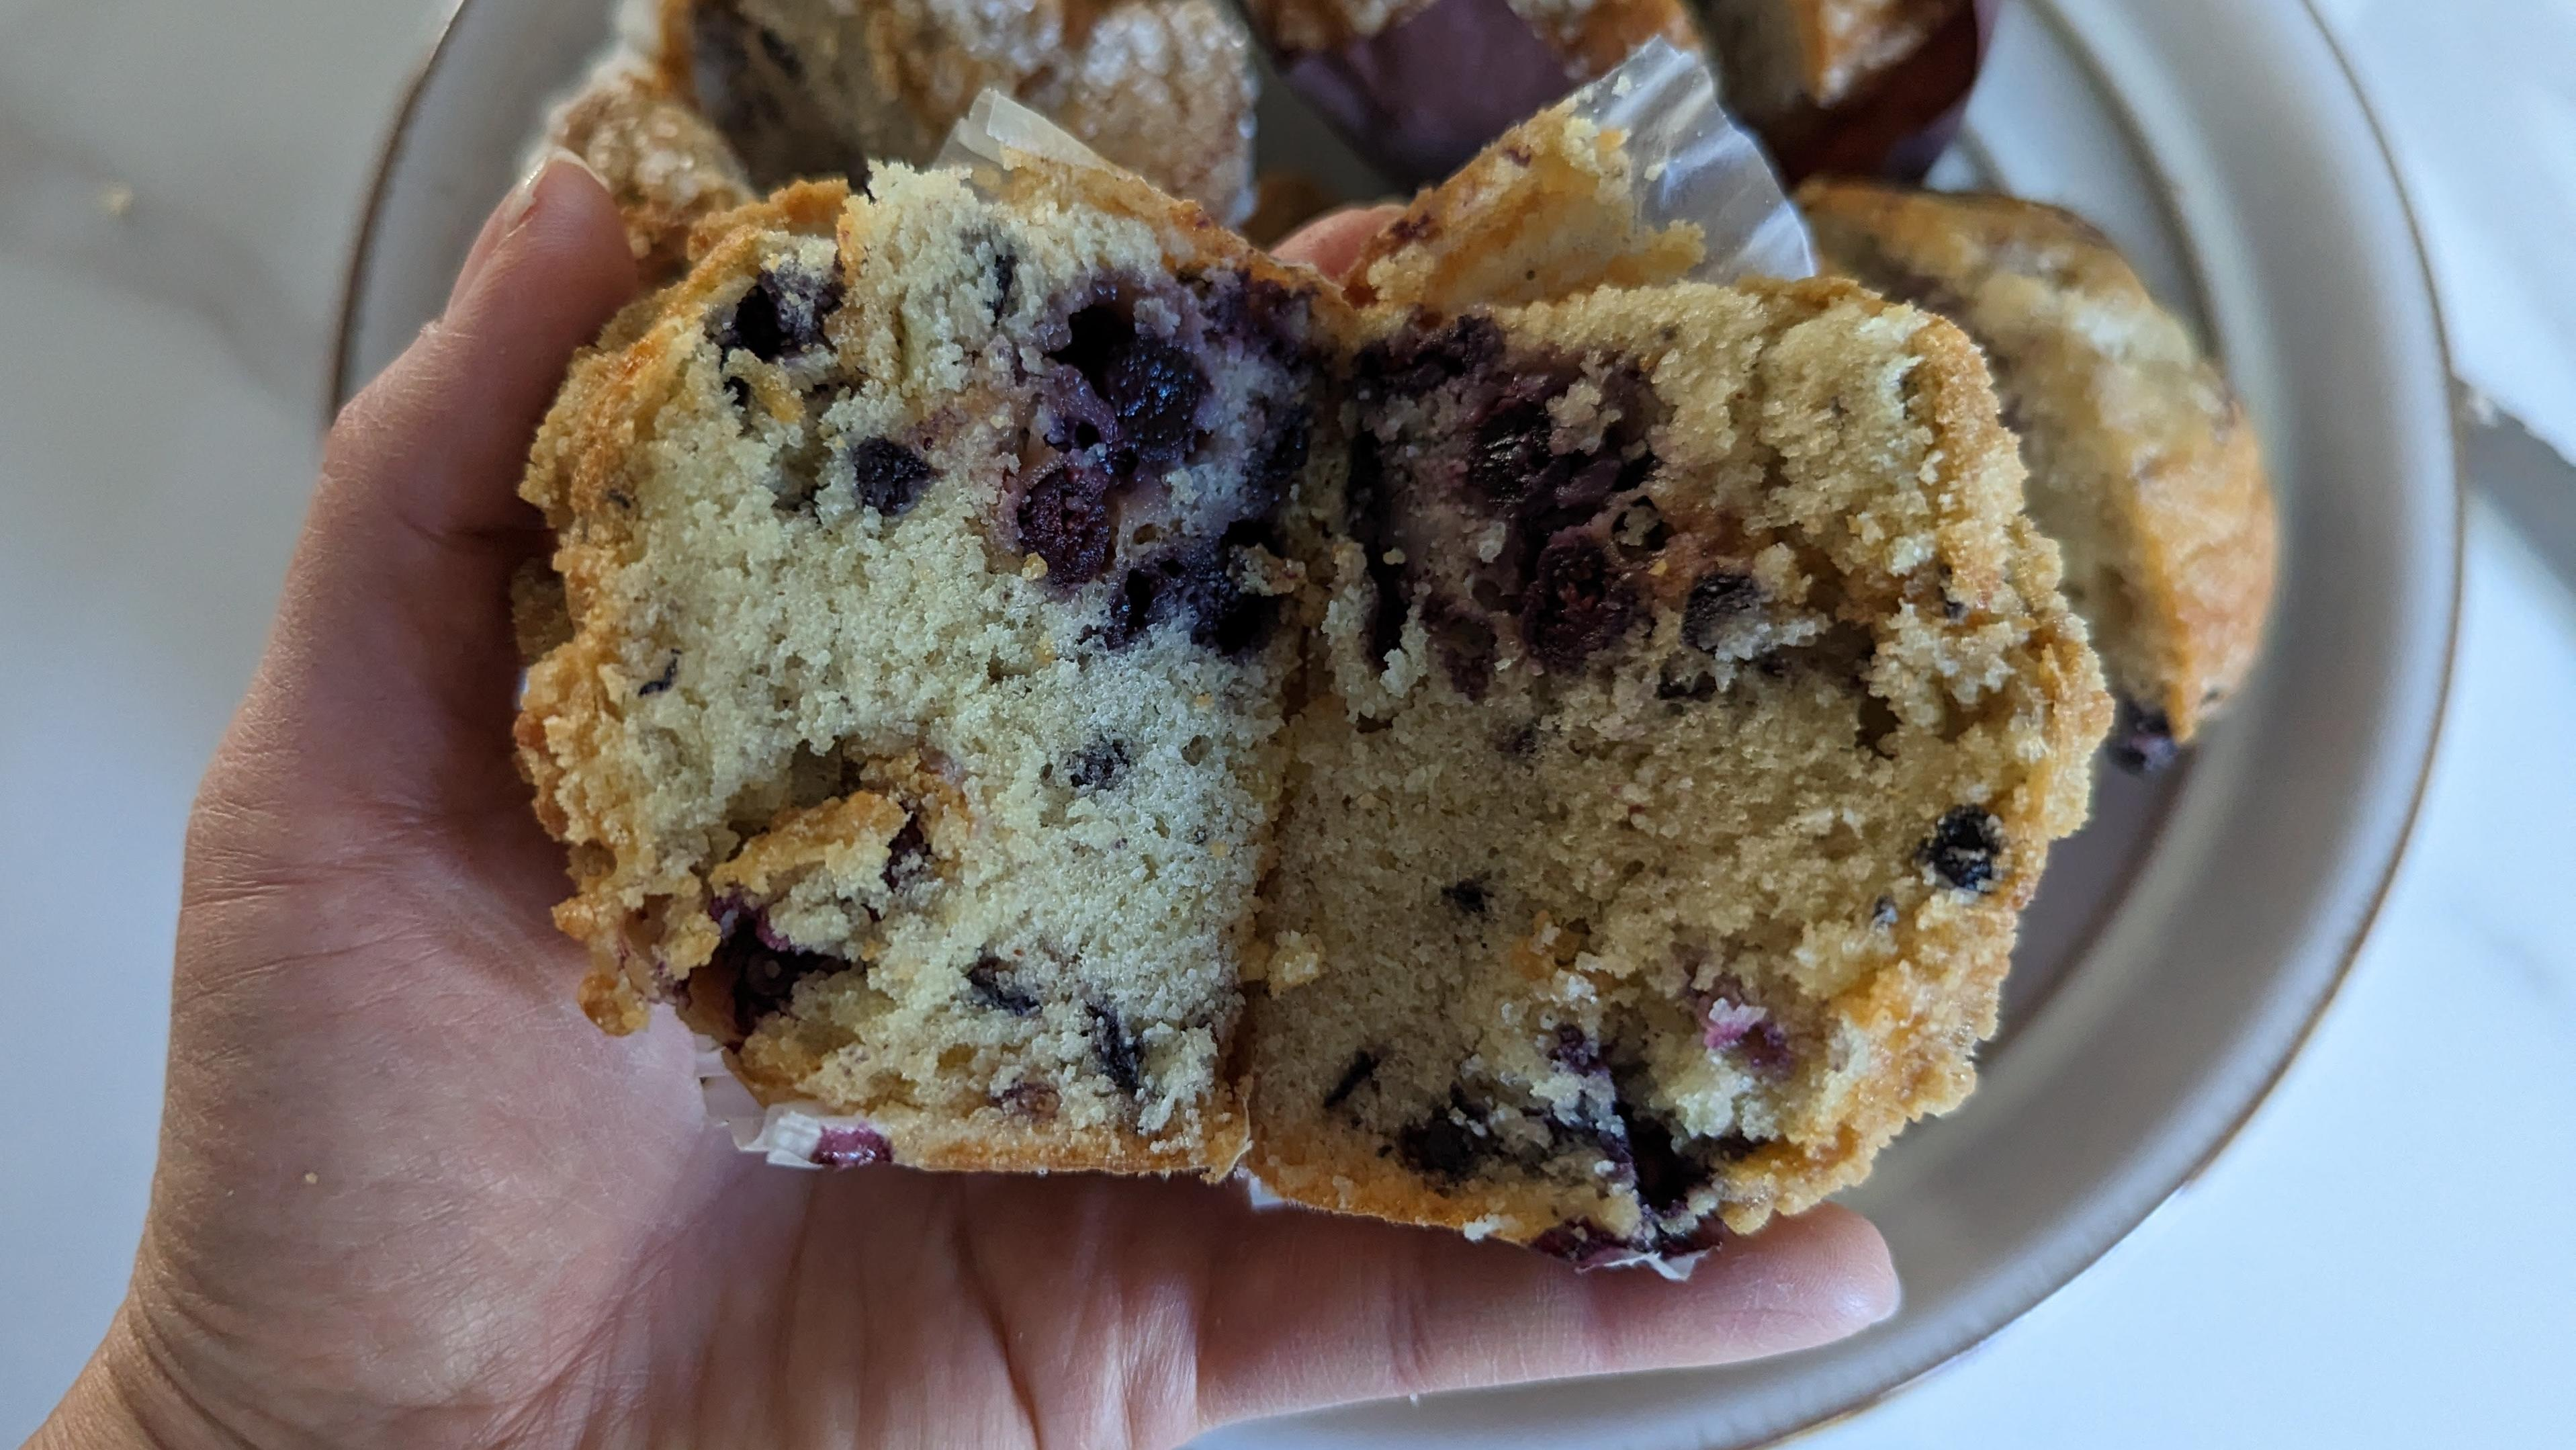 Panera Bread Blueberry Muffin cross-section